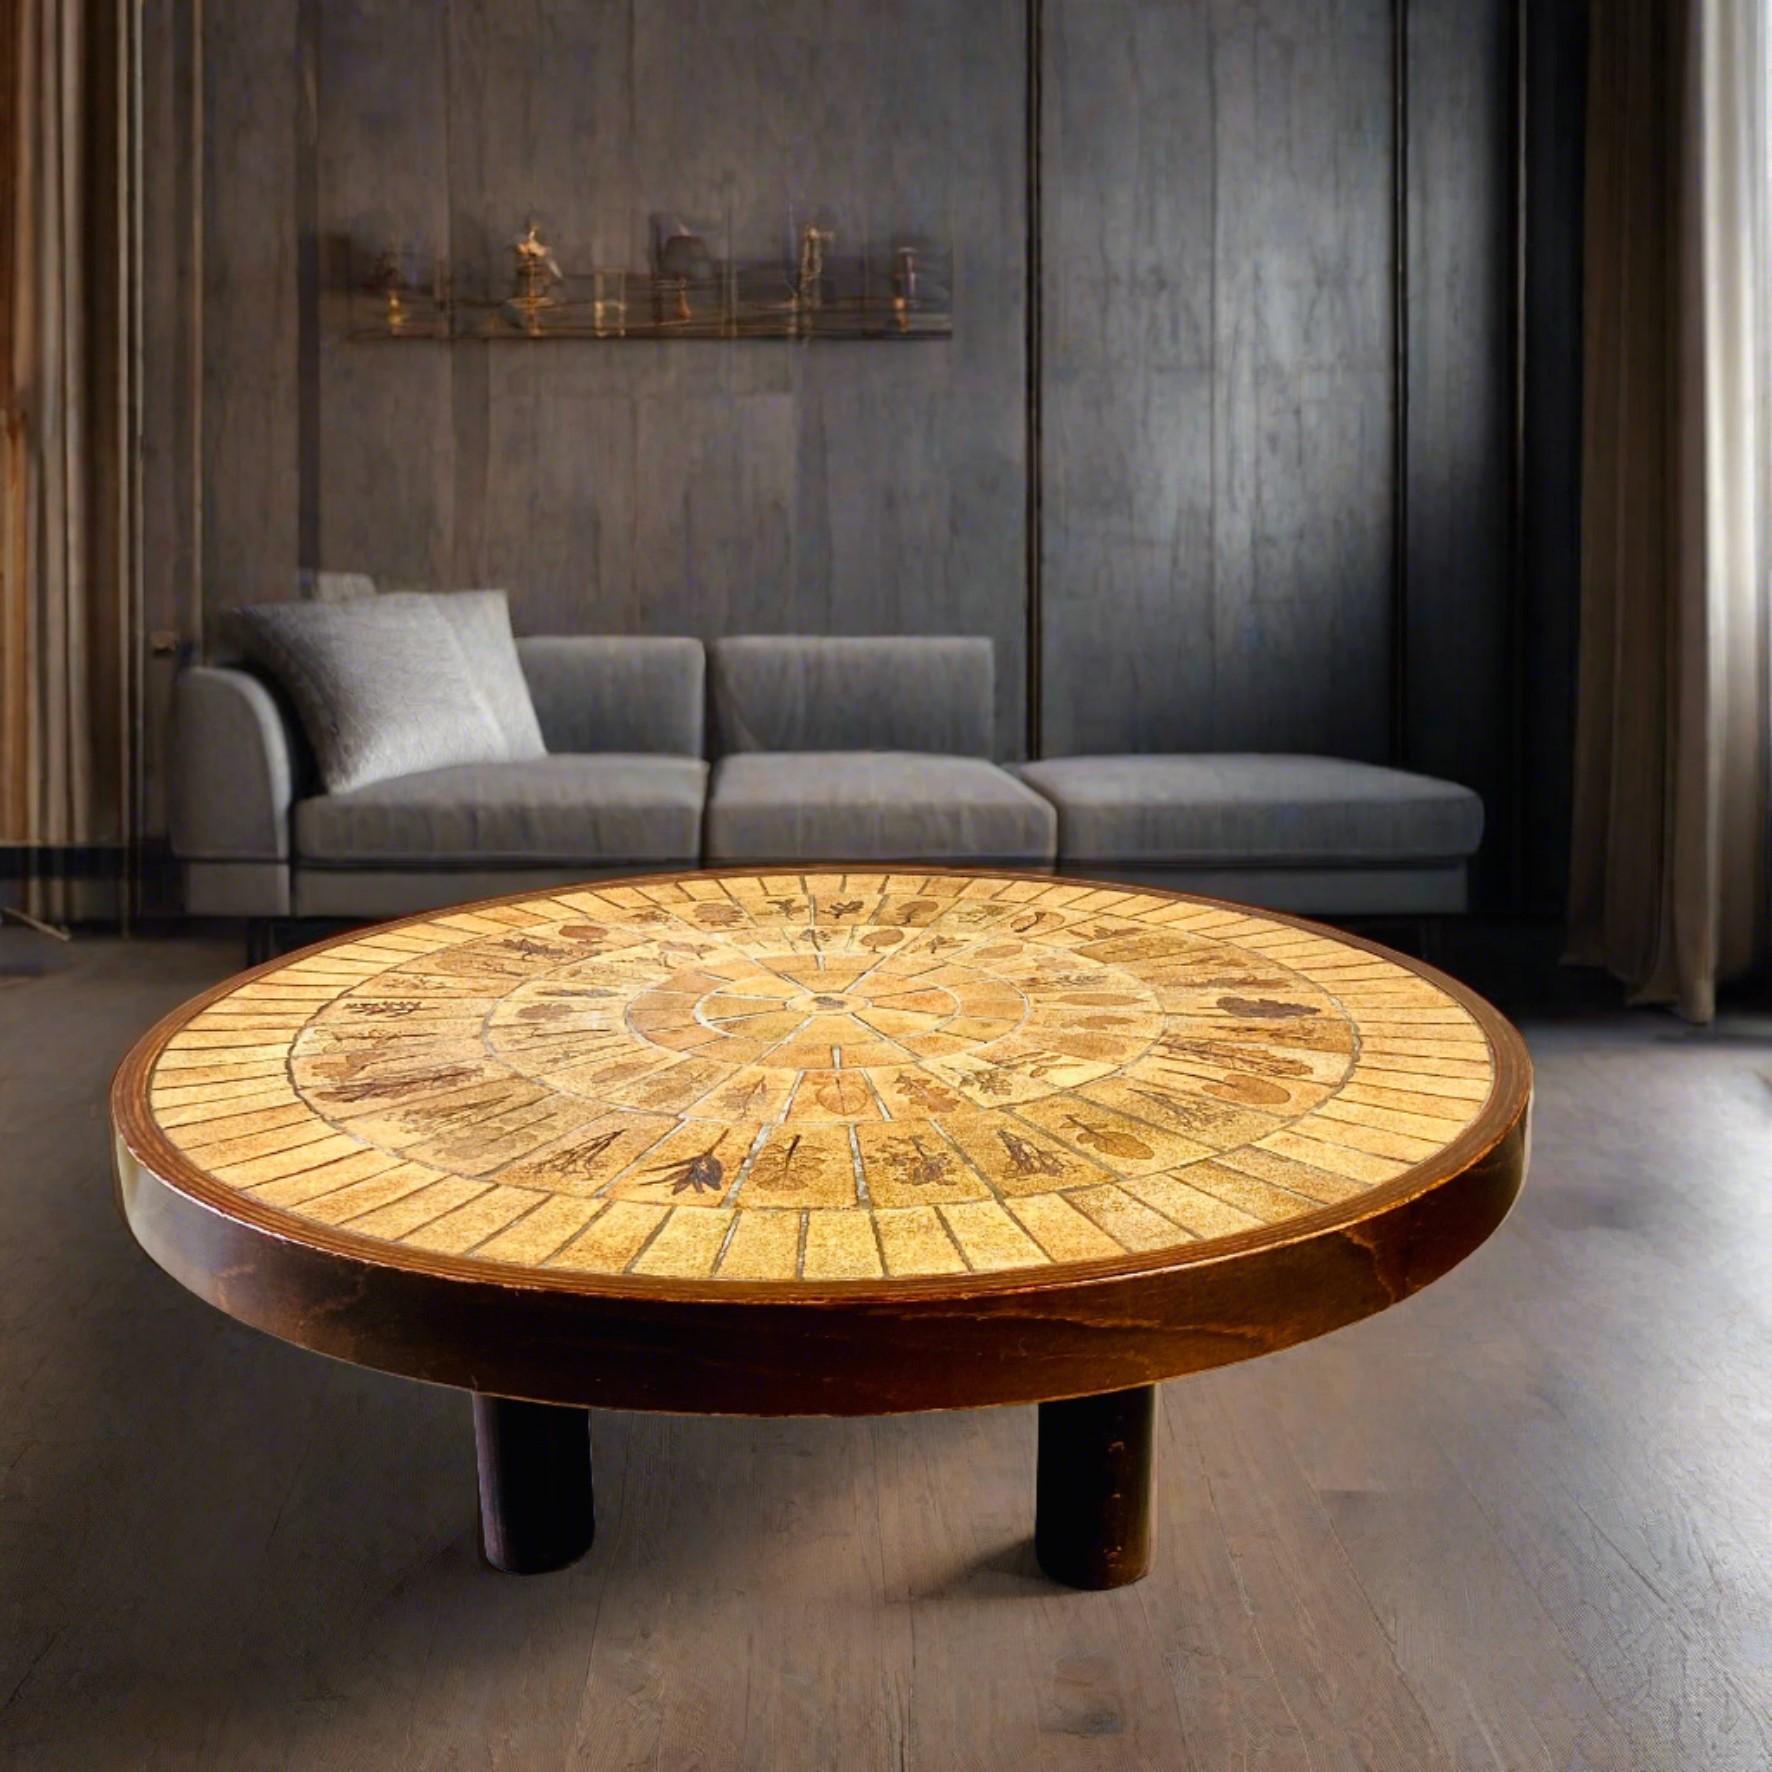 Mosaic Round Brutalist Ceramic Coffee Table by Roger Capron, France 1960 For Sale